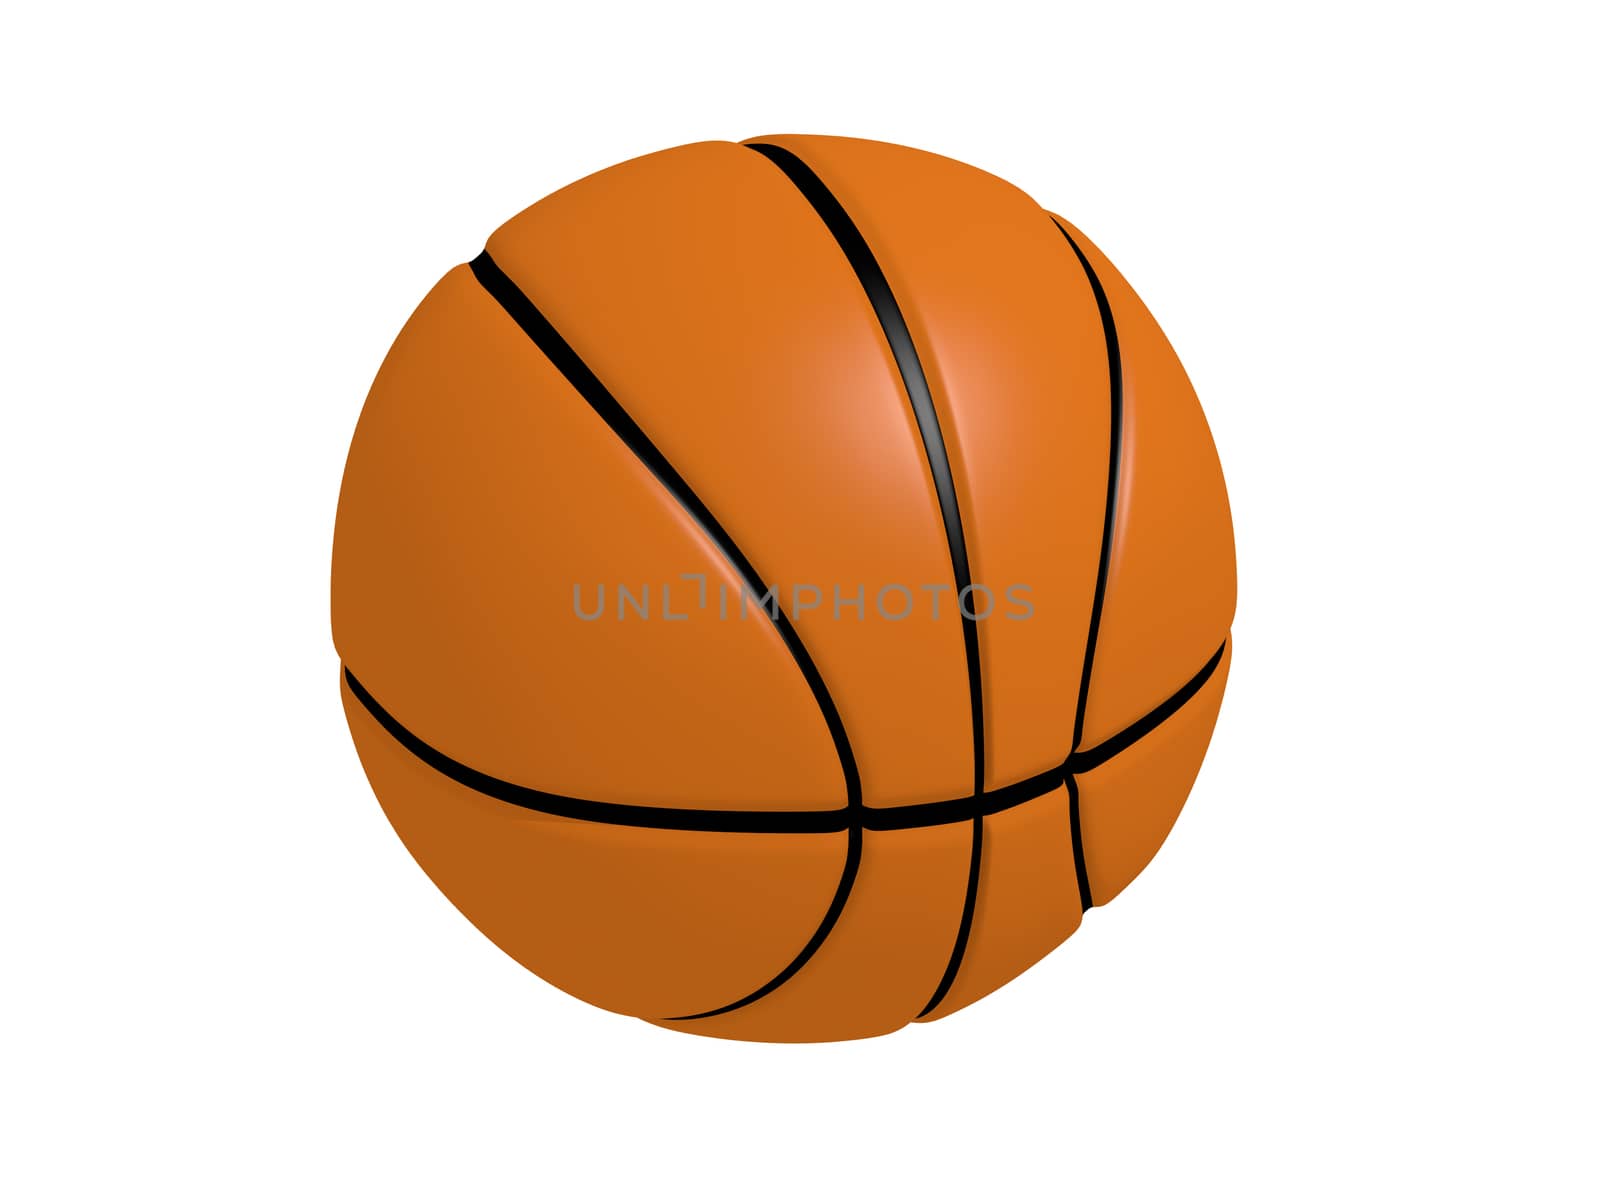 3d render illustration of Basketball with white background